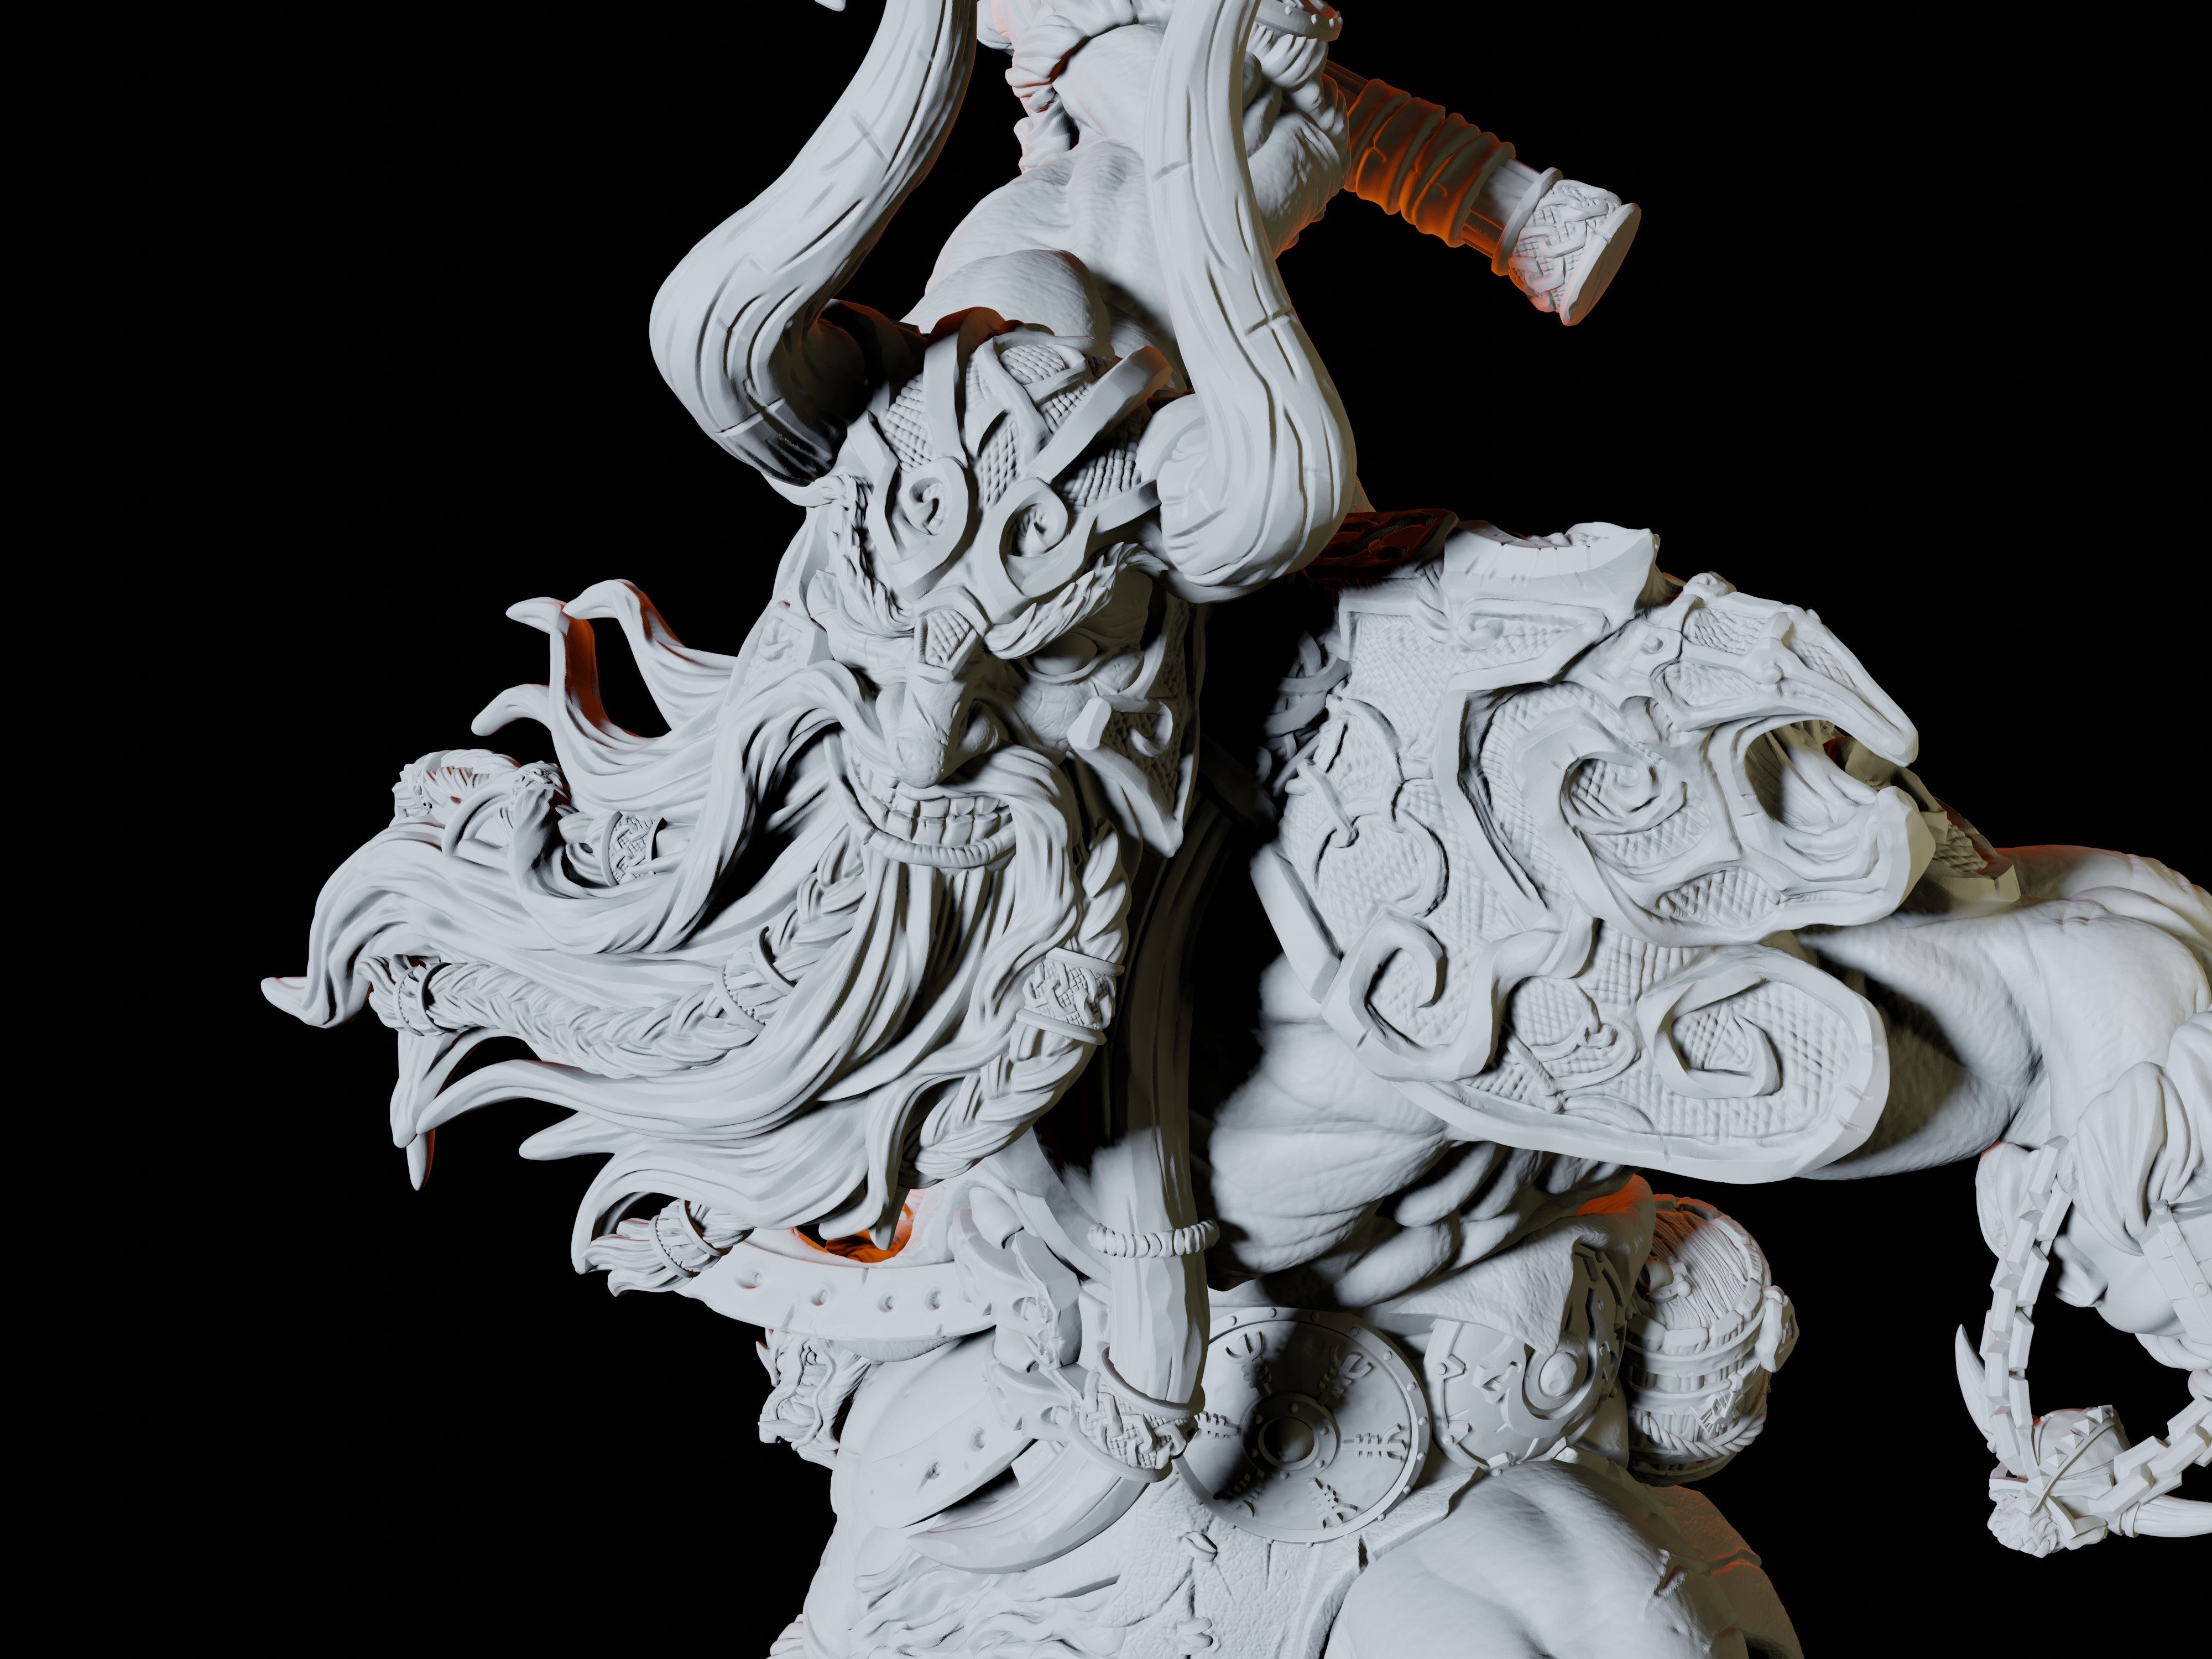 Frost Giant Miniature for Dungeons and Dragons - Myth Forged